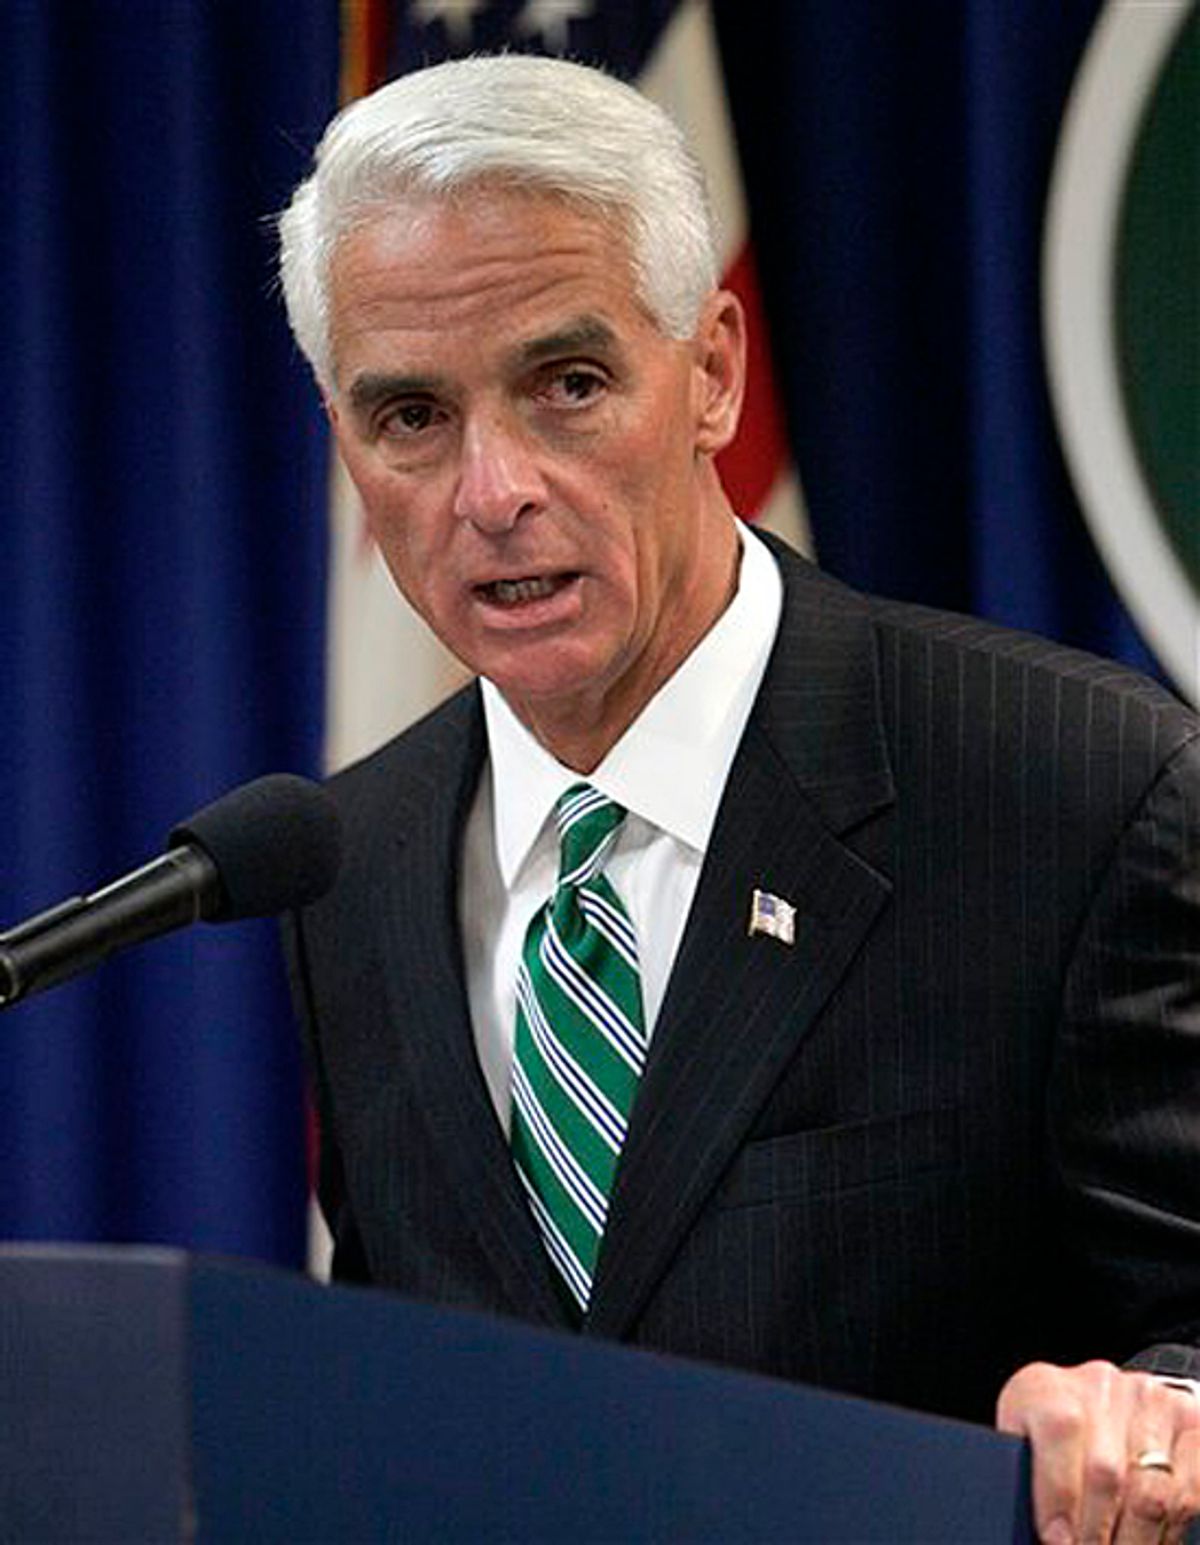 FILE - In this April 15, 2010 file photo, Gov. Charlie Crist speaks in Tallahassee, Fla. Plan A isn't working so well for Gov. Charlie Crist, a former rising Republican star who now trails badly in the Florida Senate primary, but Plans B, C and D don't look much better. His populist approach to governing no longer sits well with angry conservatives who have abandoned him in favor of his primary opponent, former state House speaker Marco Rubio.  (AP Photo/Steve Cannon) (Steve Cannon)